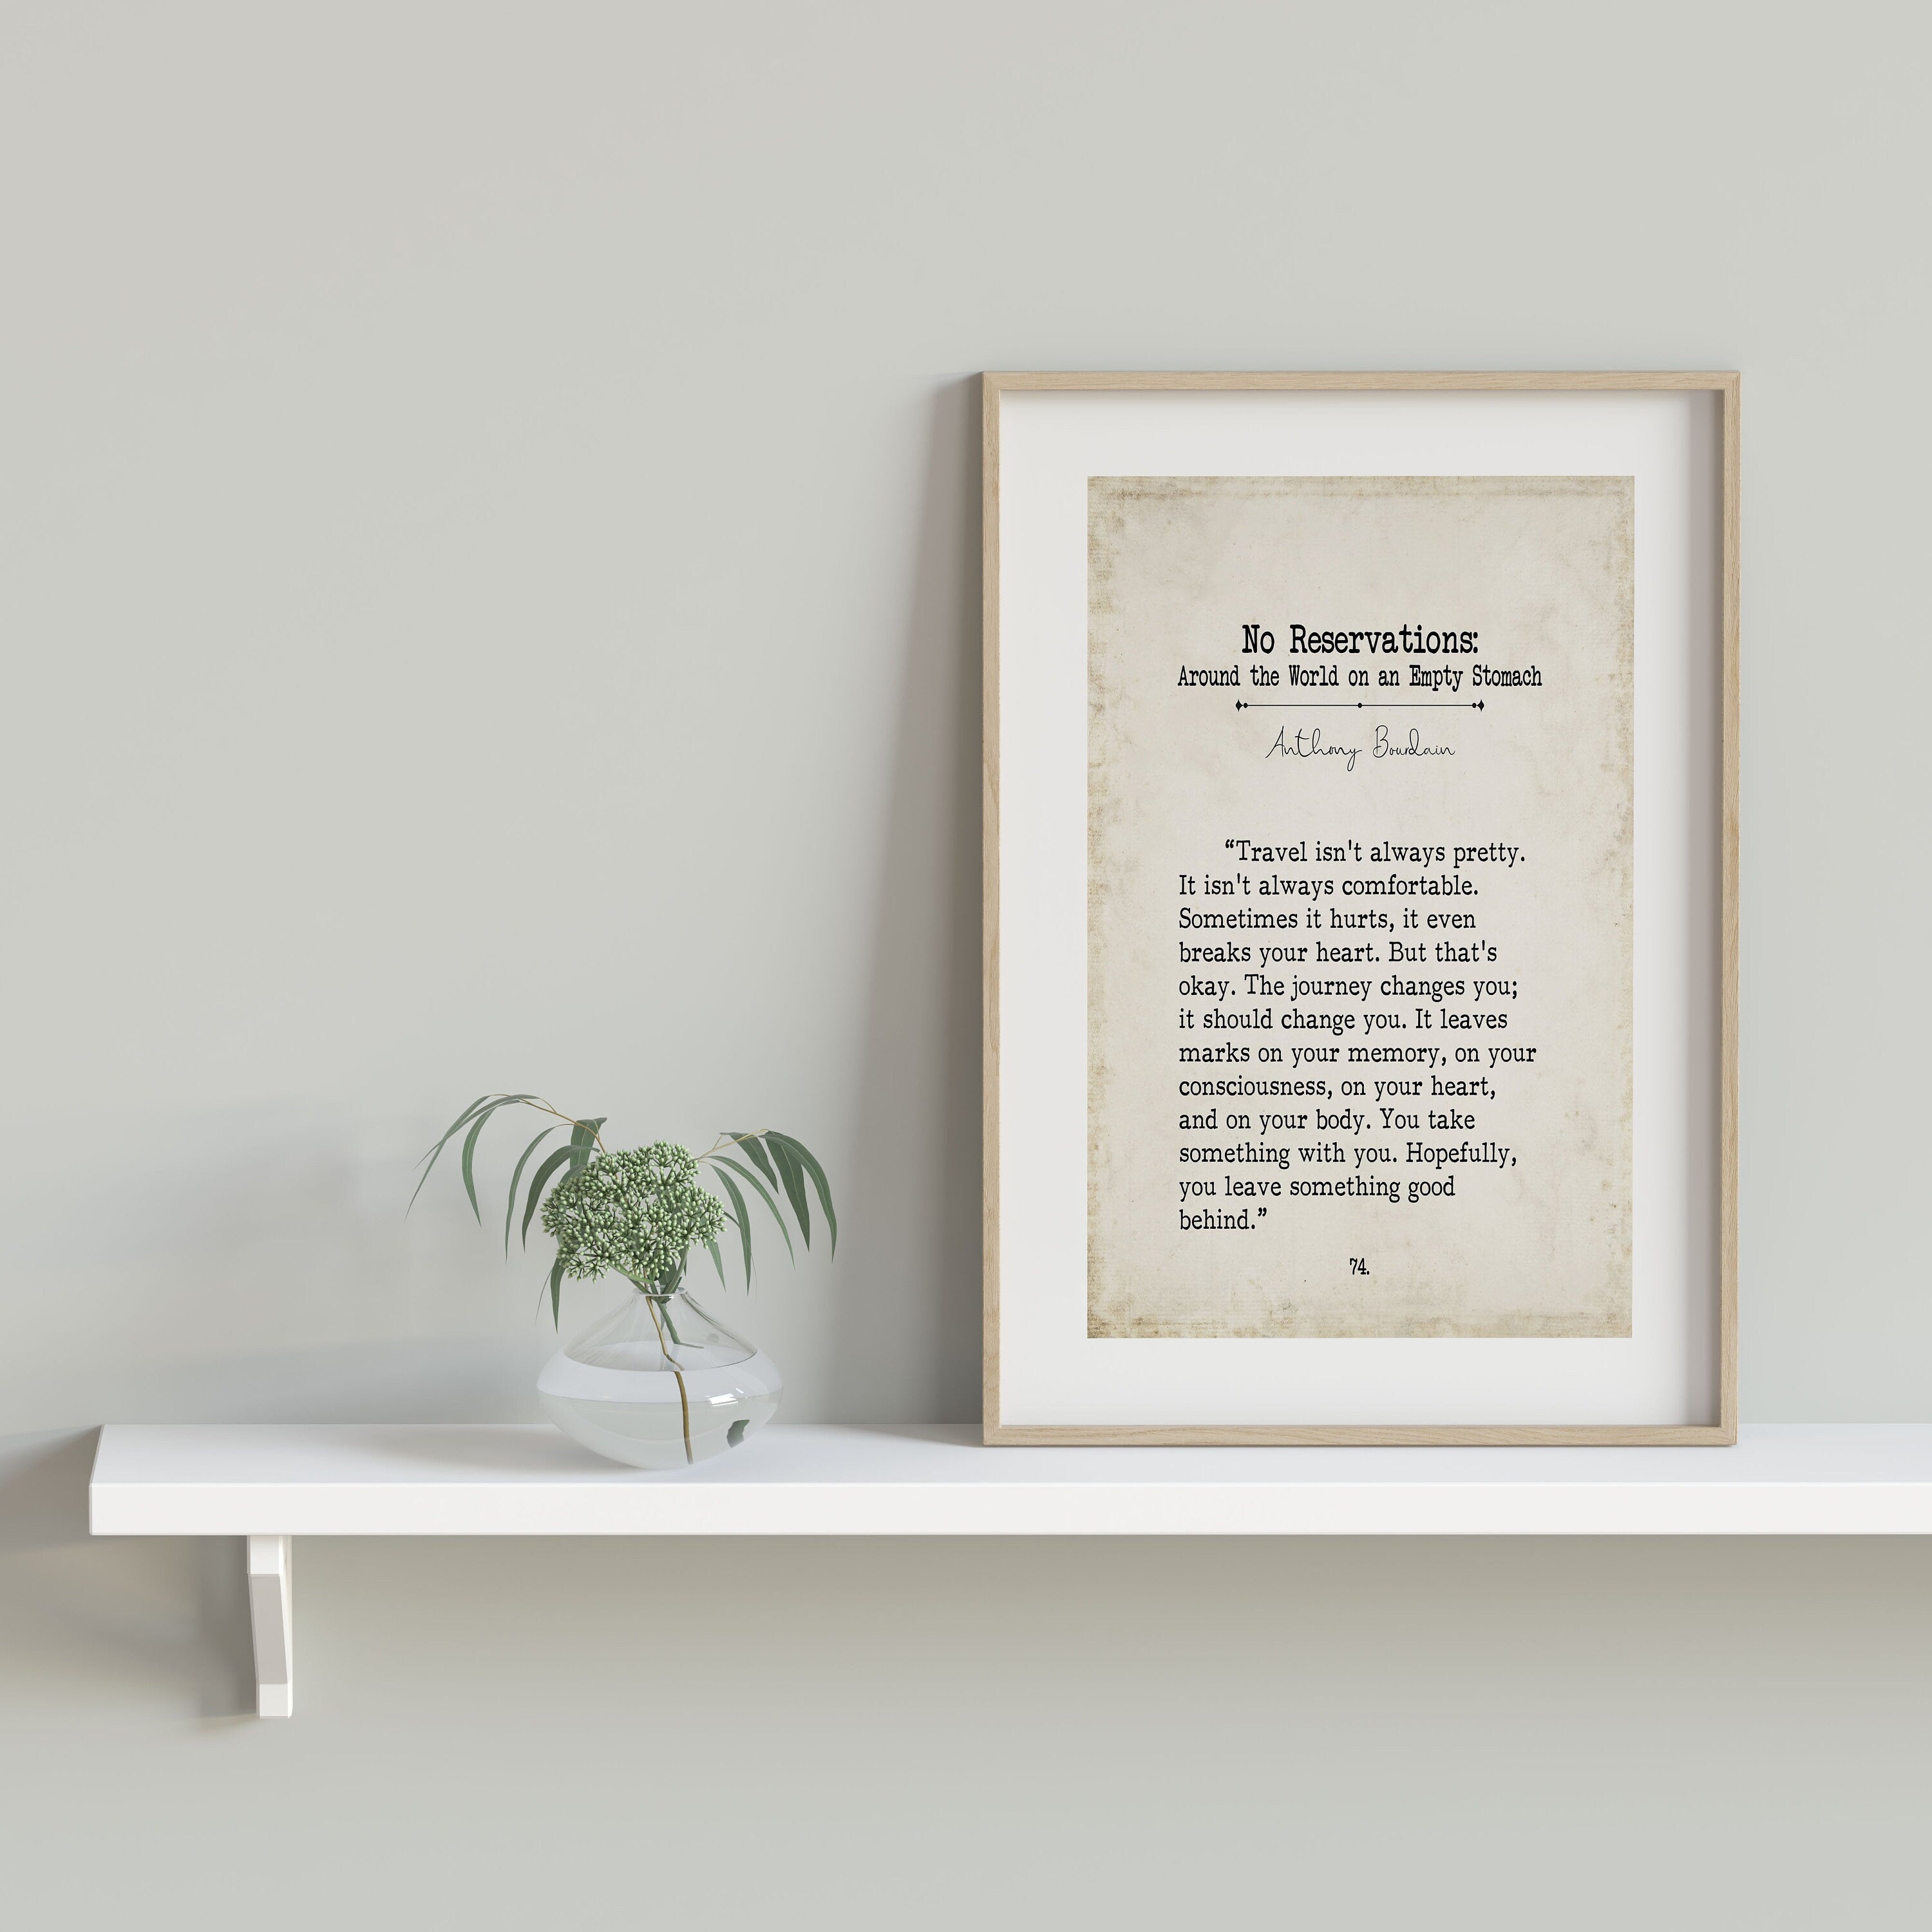 Anthony Bourdain Book Page Inspirational Wall Art, Travel Isn't Pretty Quote Vintage Style Print Wall Decor